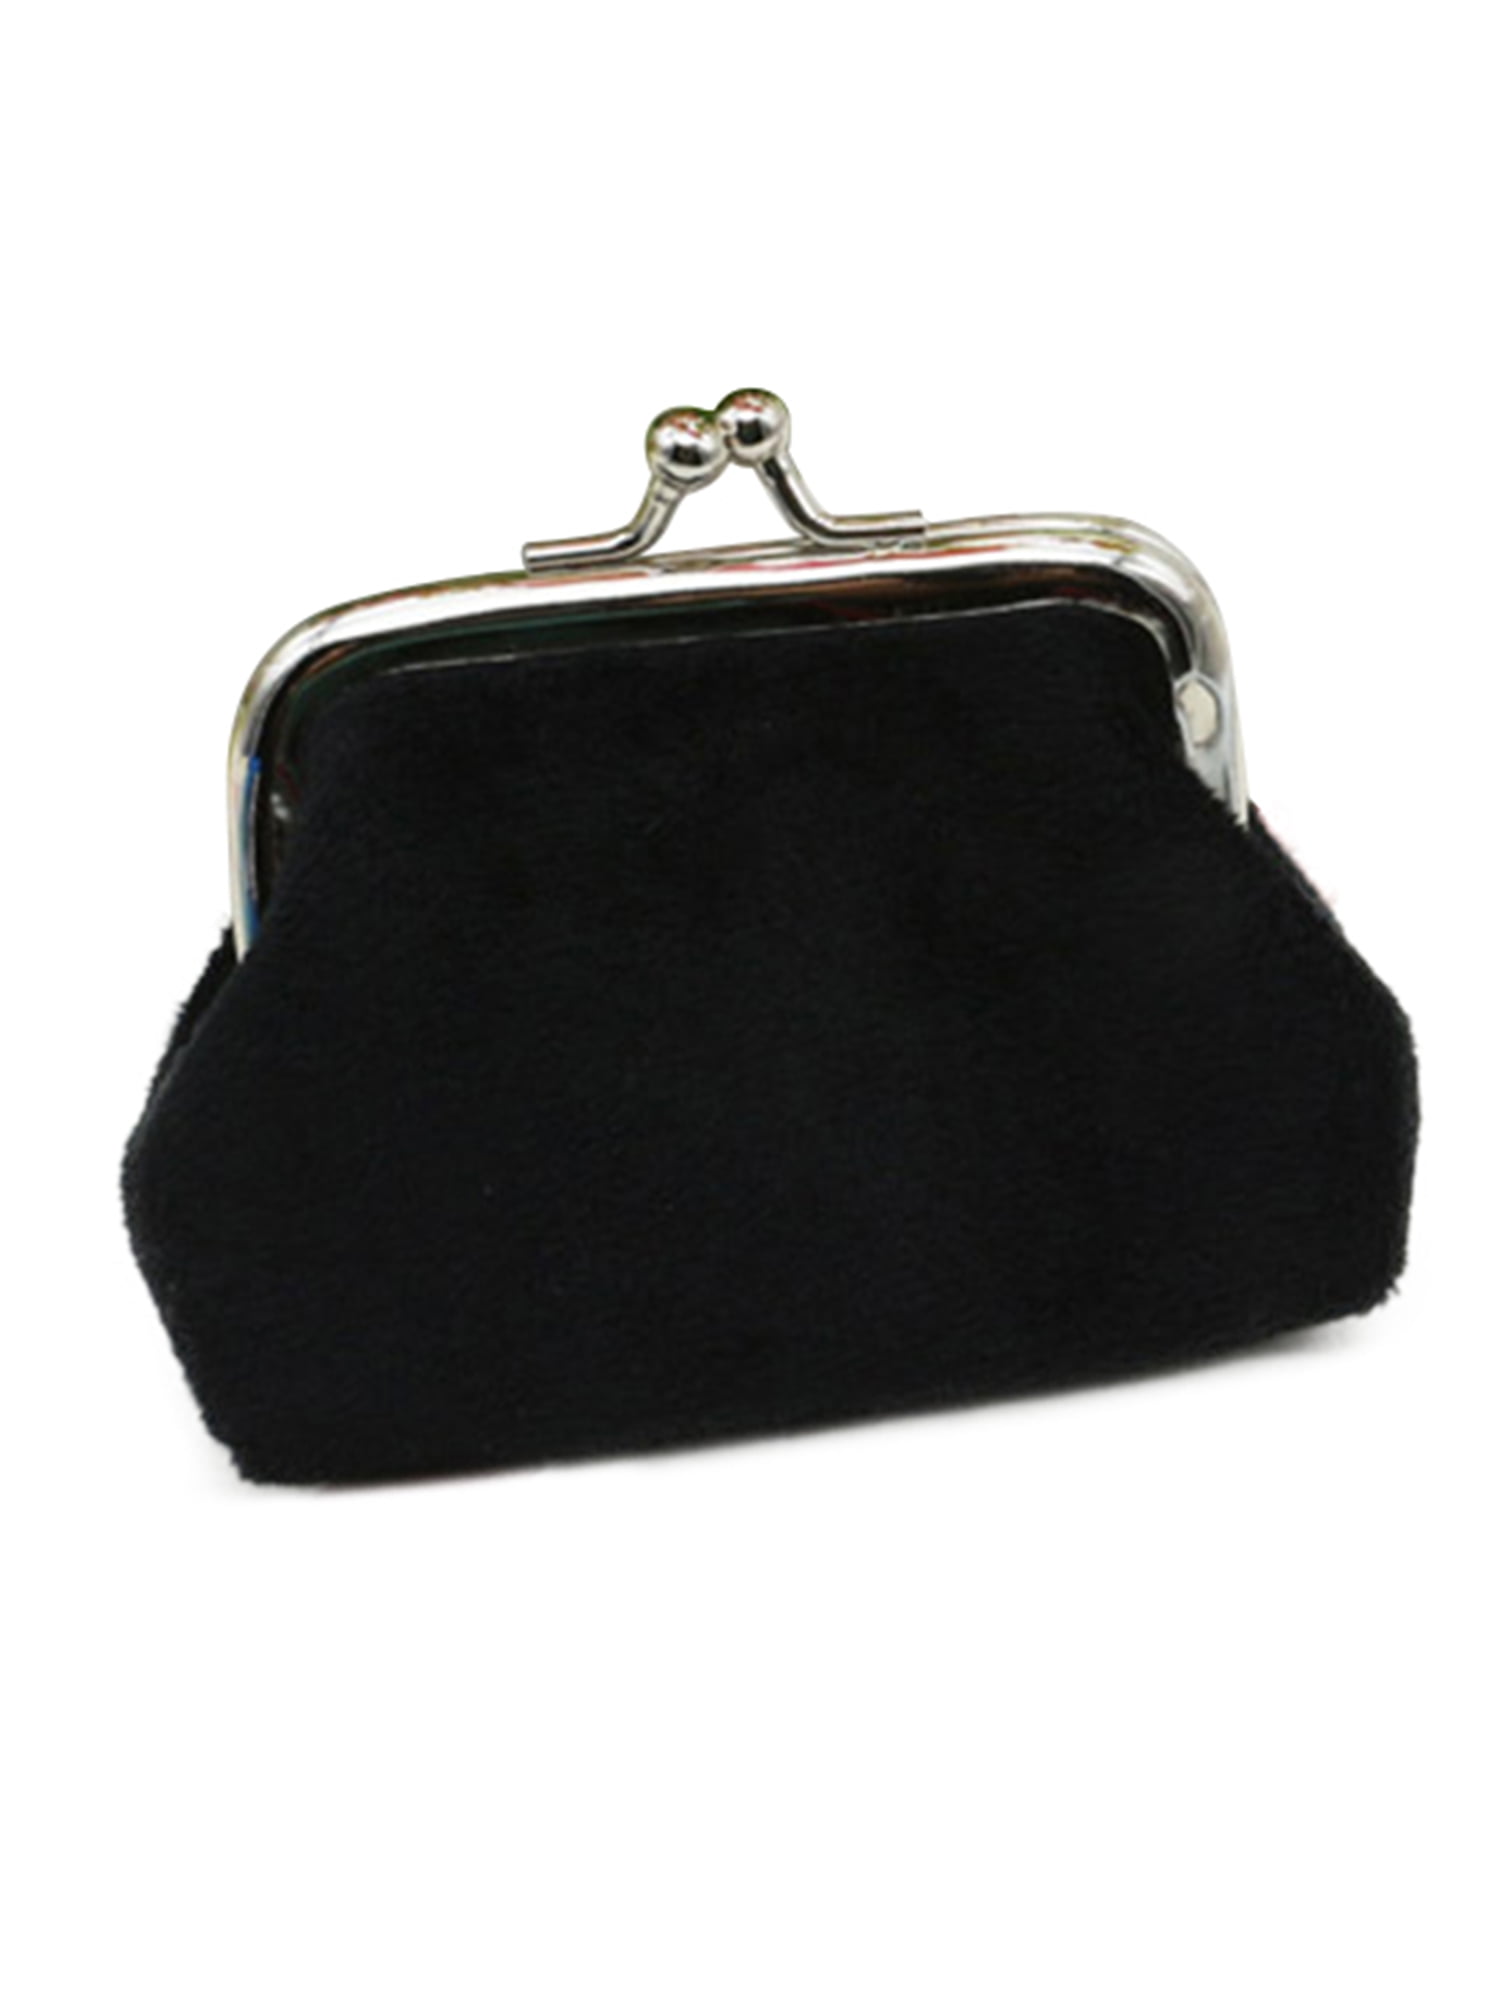 Black Faux Leather Purse Credit Card Coins Cash Display box ladies present gift 